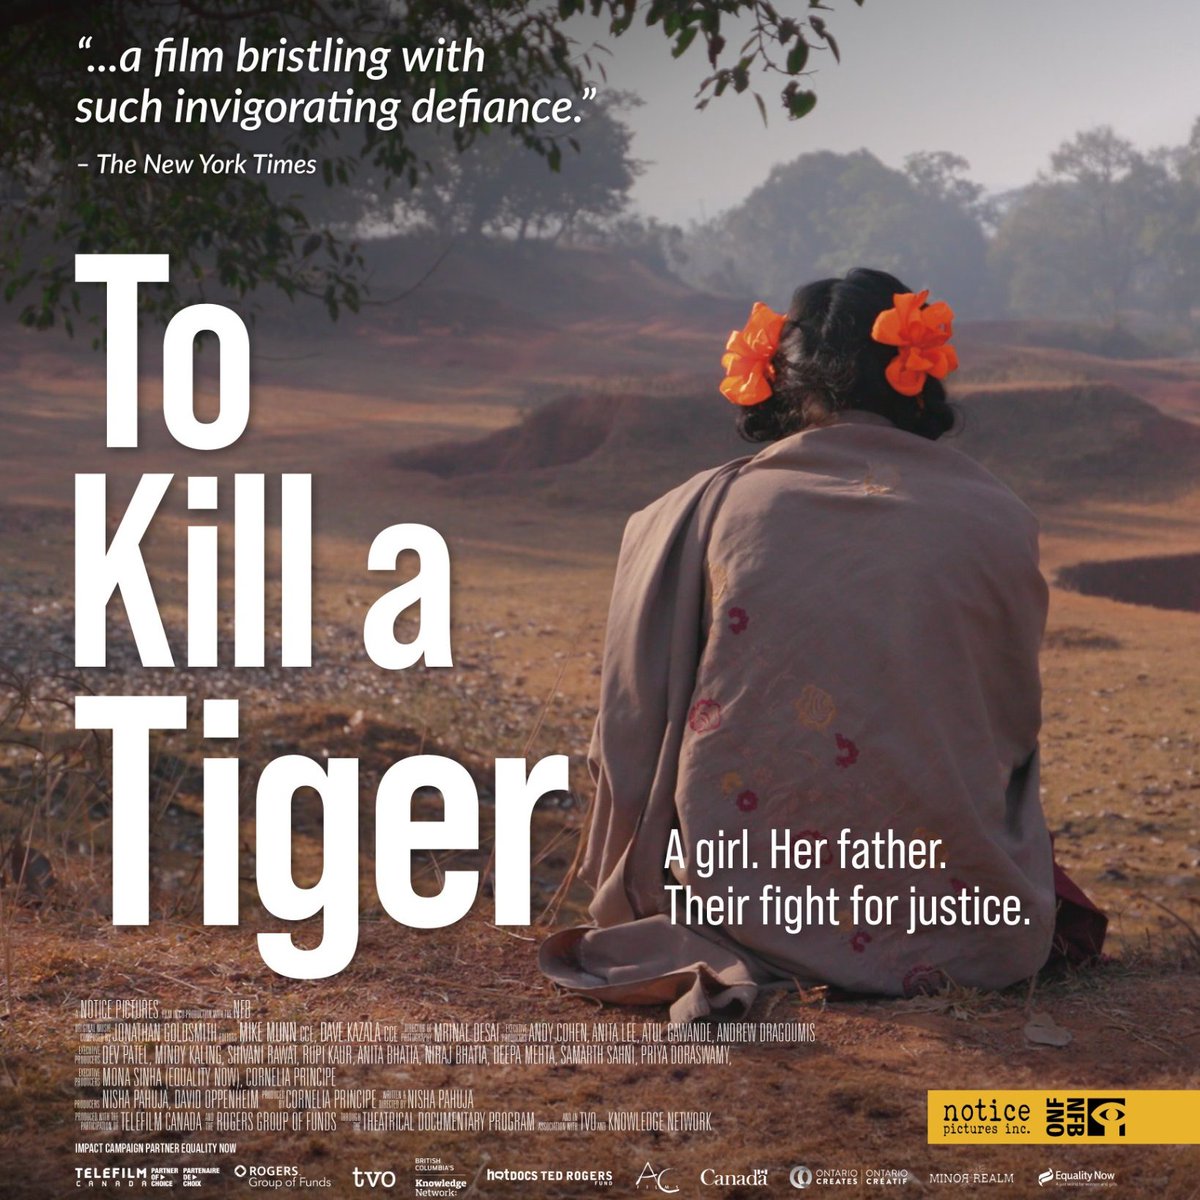 No Indian nomination this year. #Oscars2024 

#ToKillATiger is a Canadian production and the director #NishaPahuja is also a Canadian.